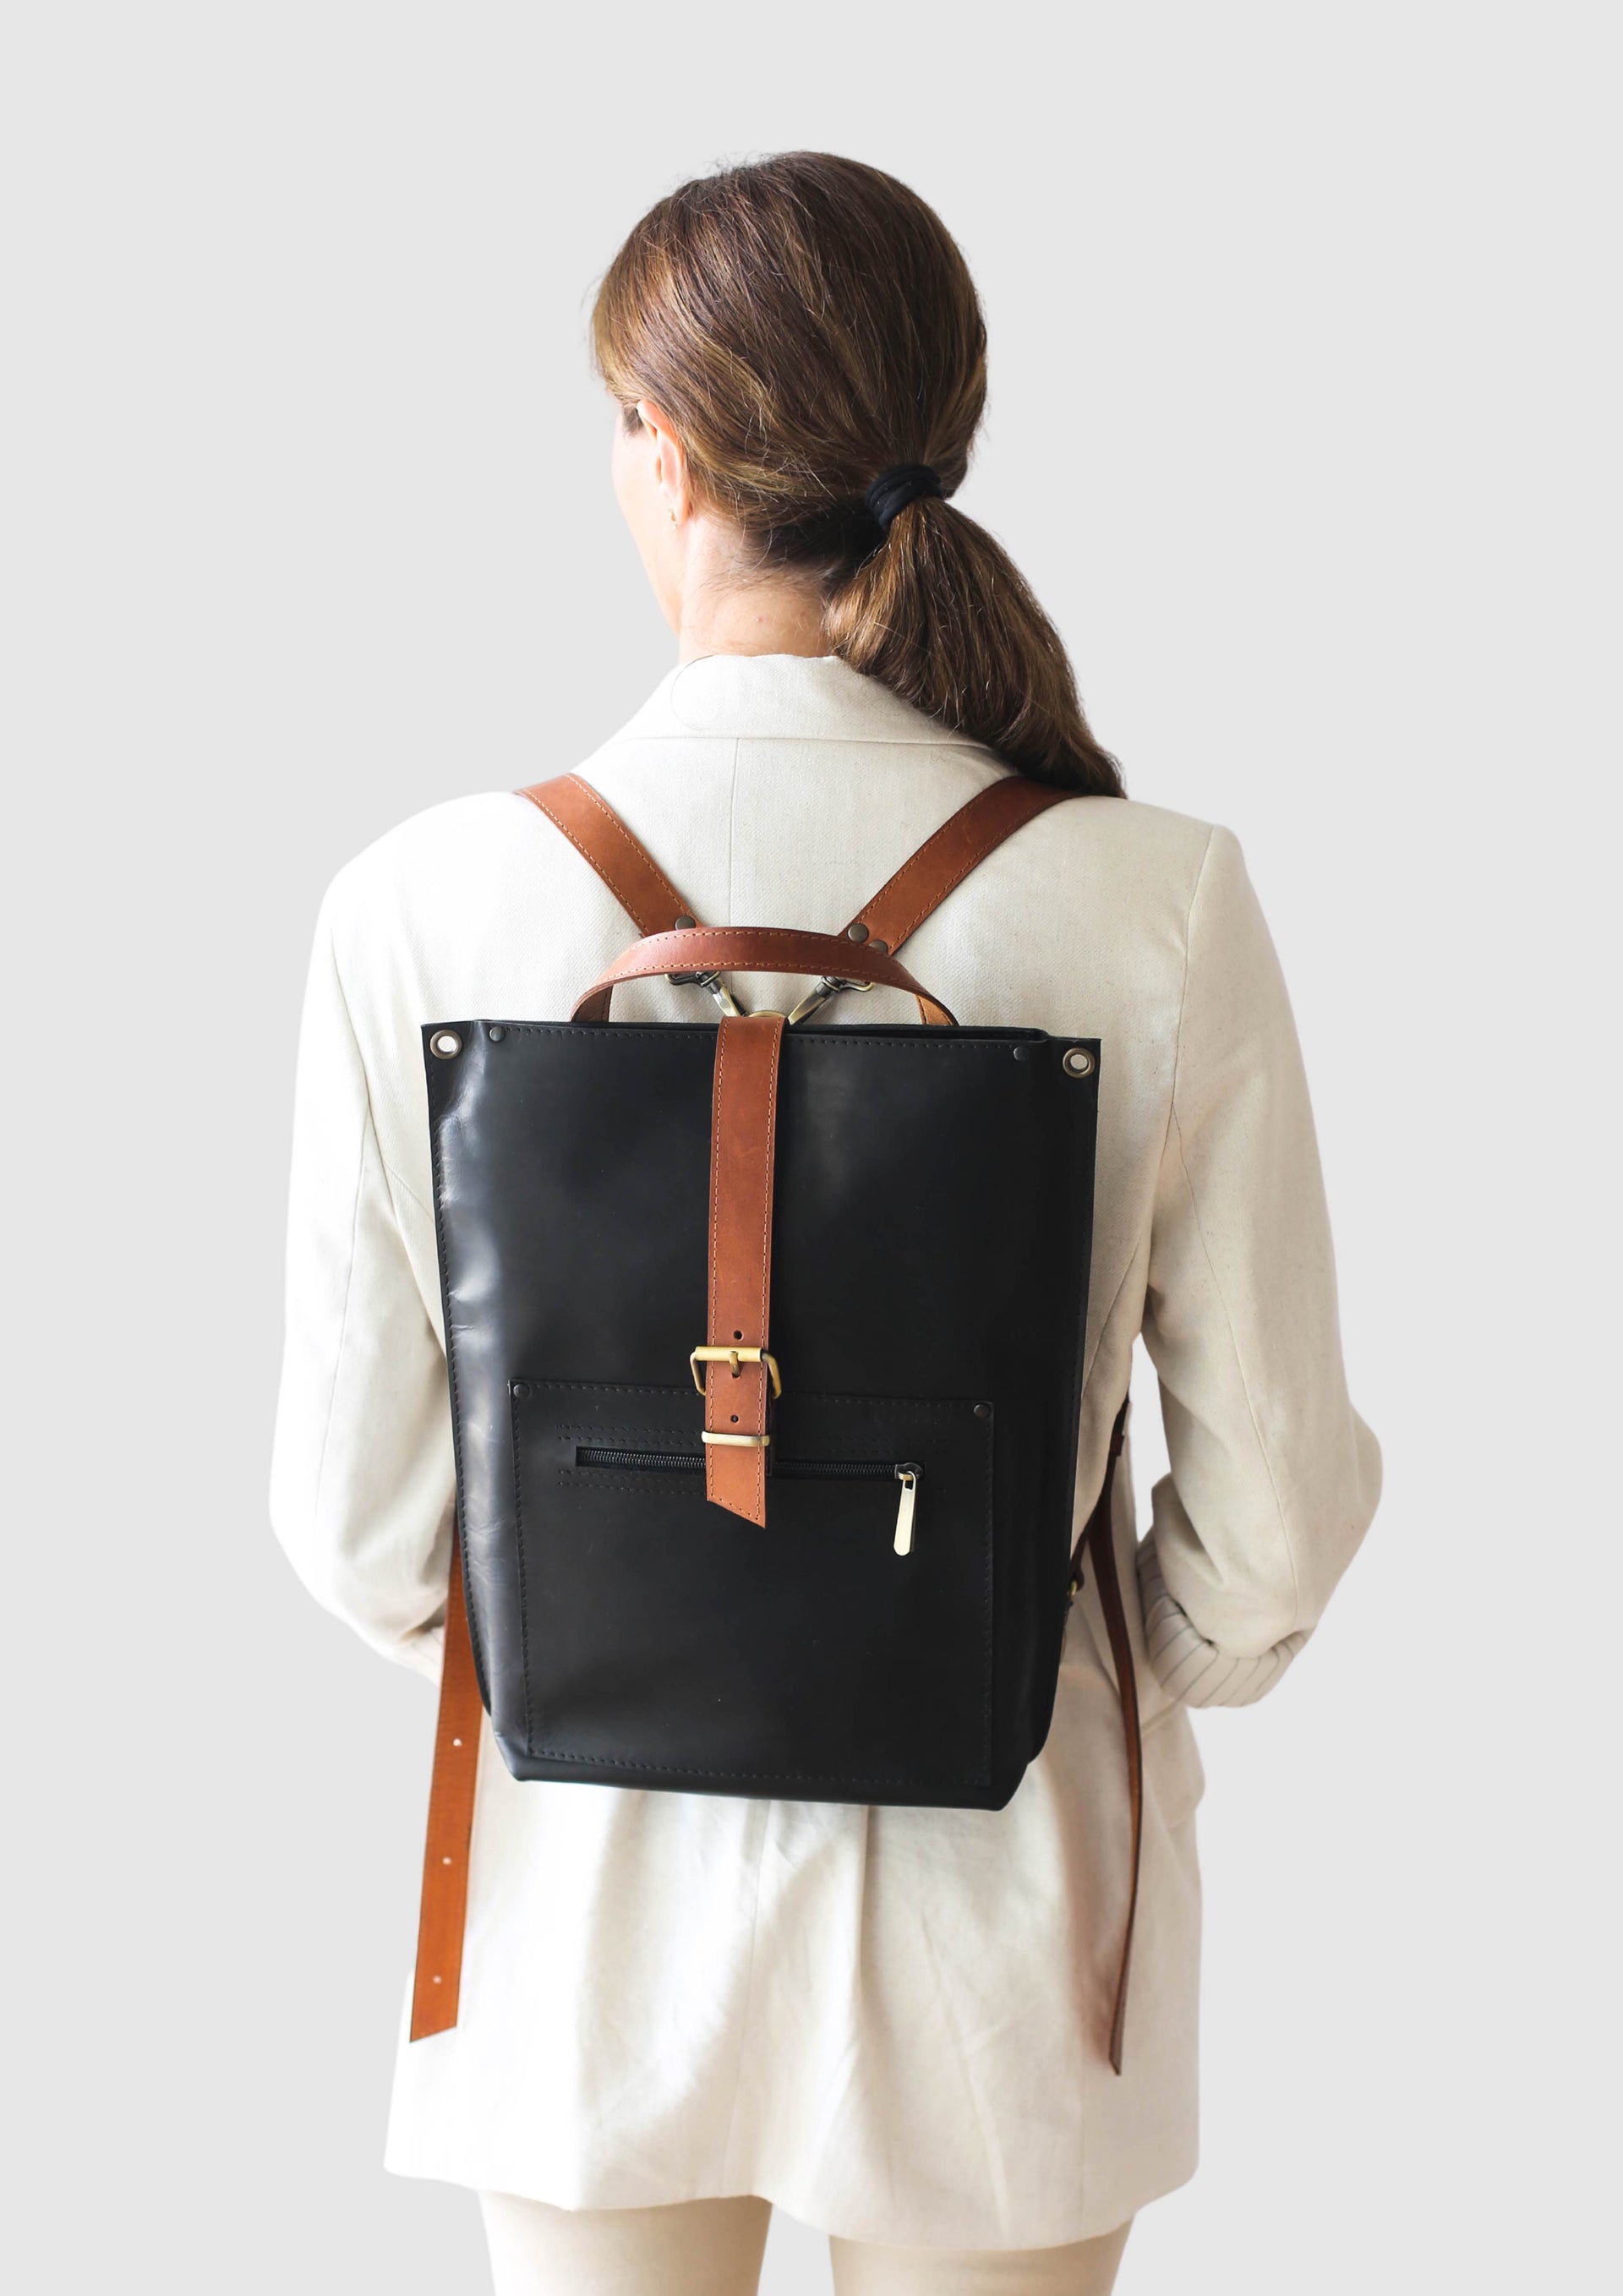 Black leather backpack for work